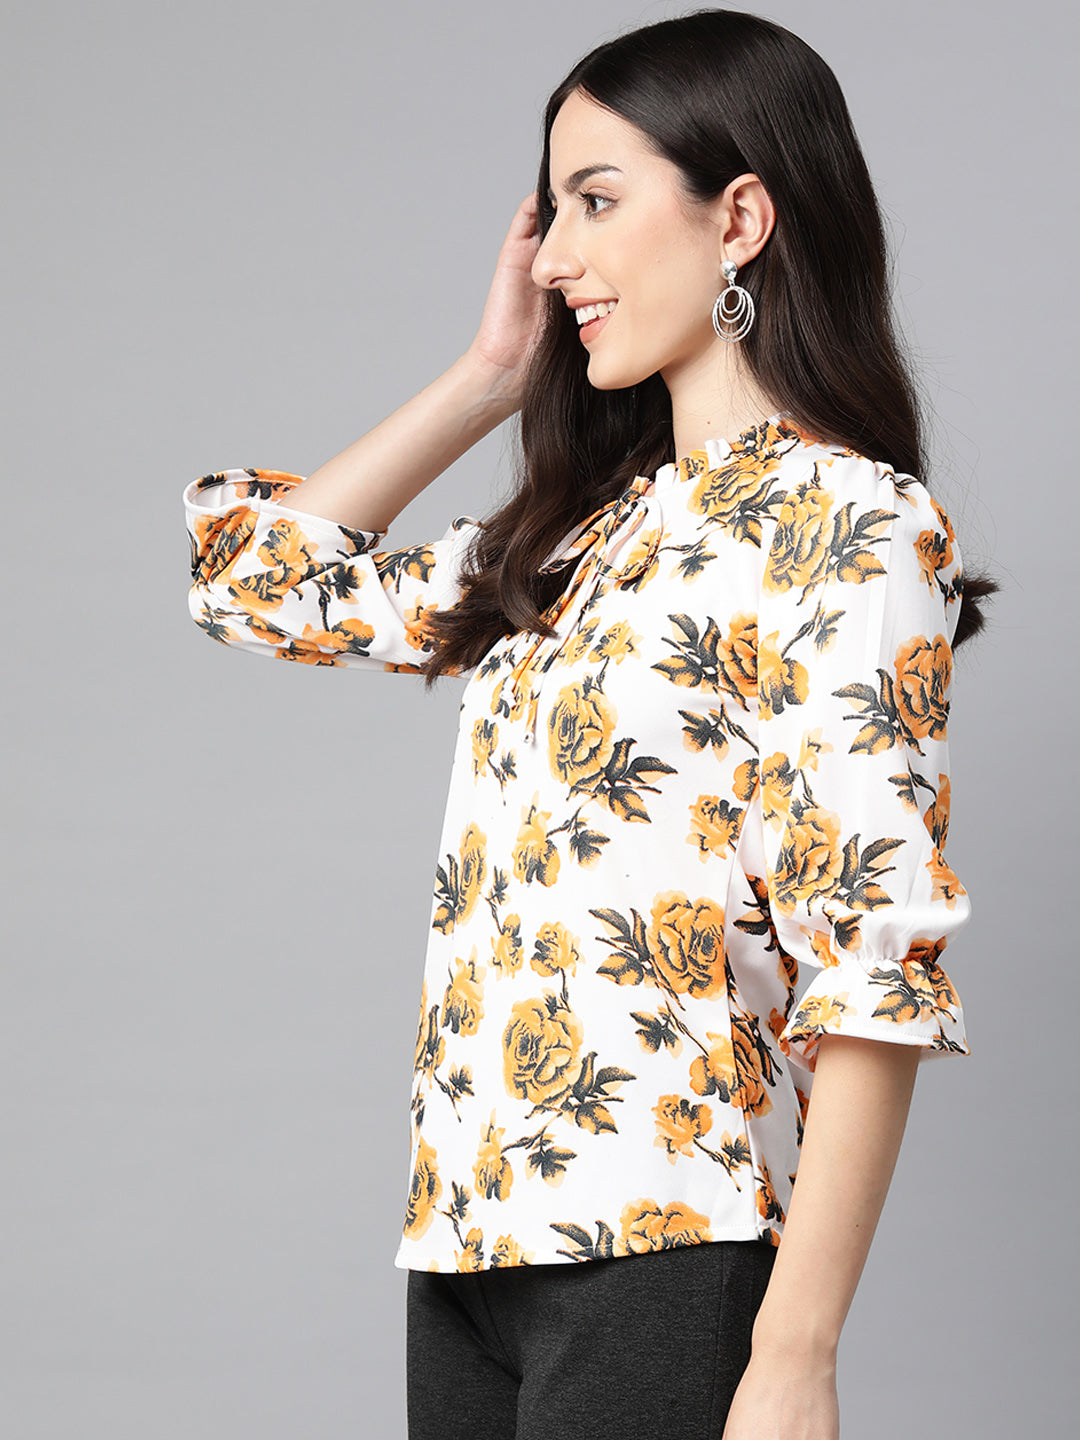 Cottinfab Floral Print Tie-Up Neck Puff Sleeves Shirt Style Top